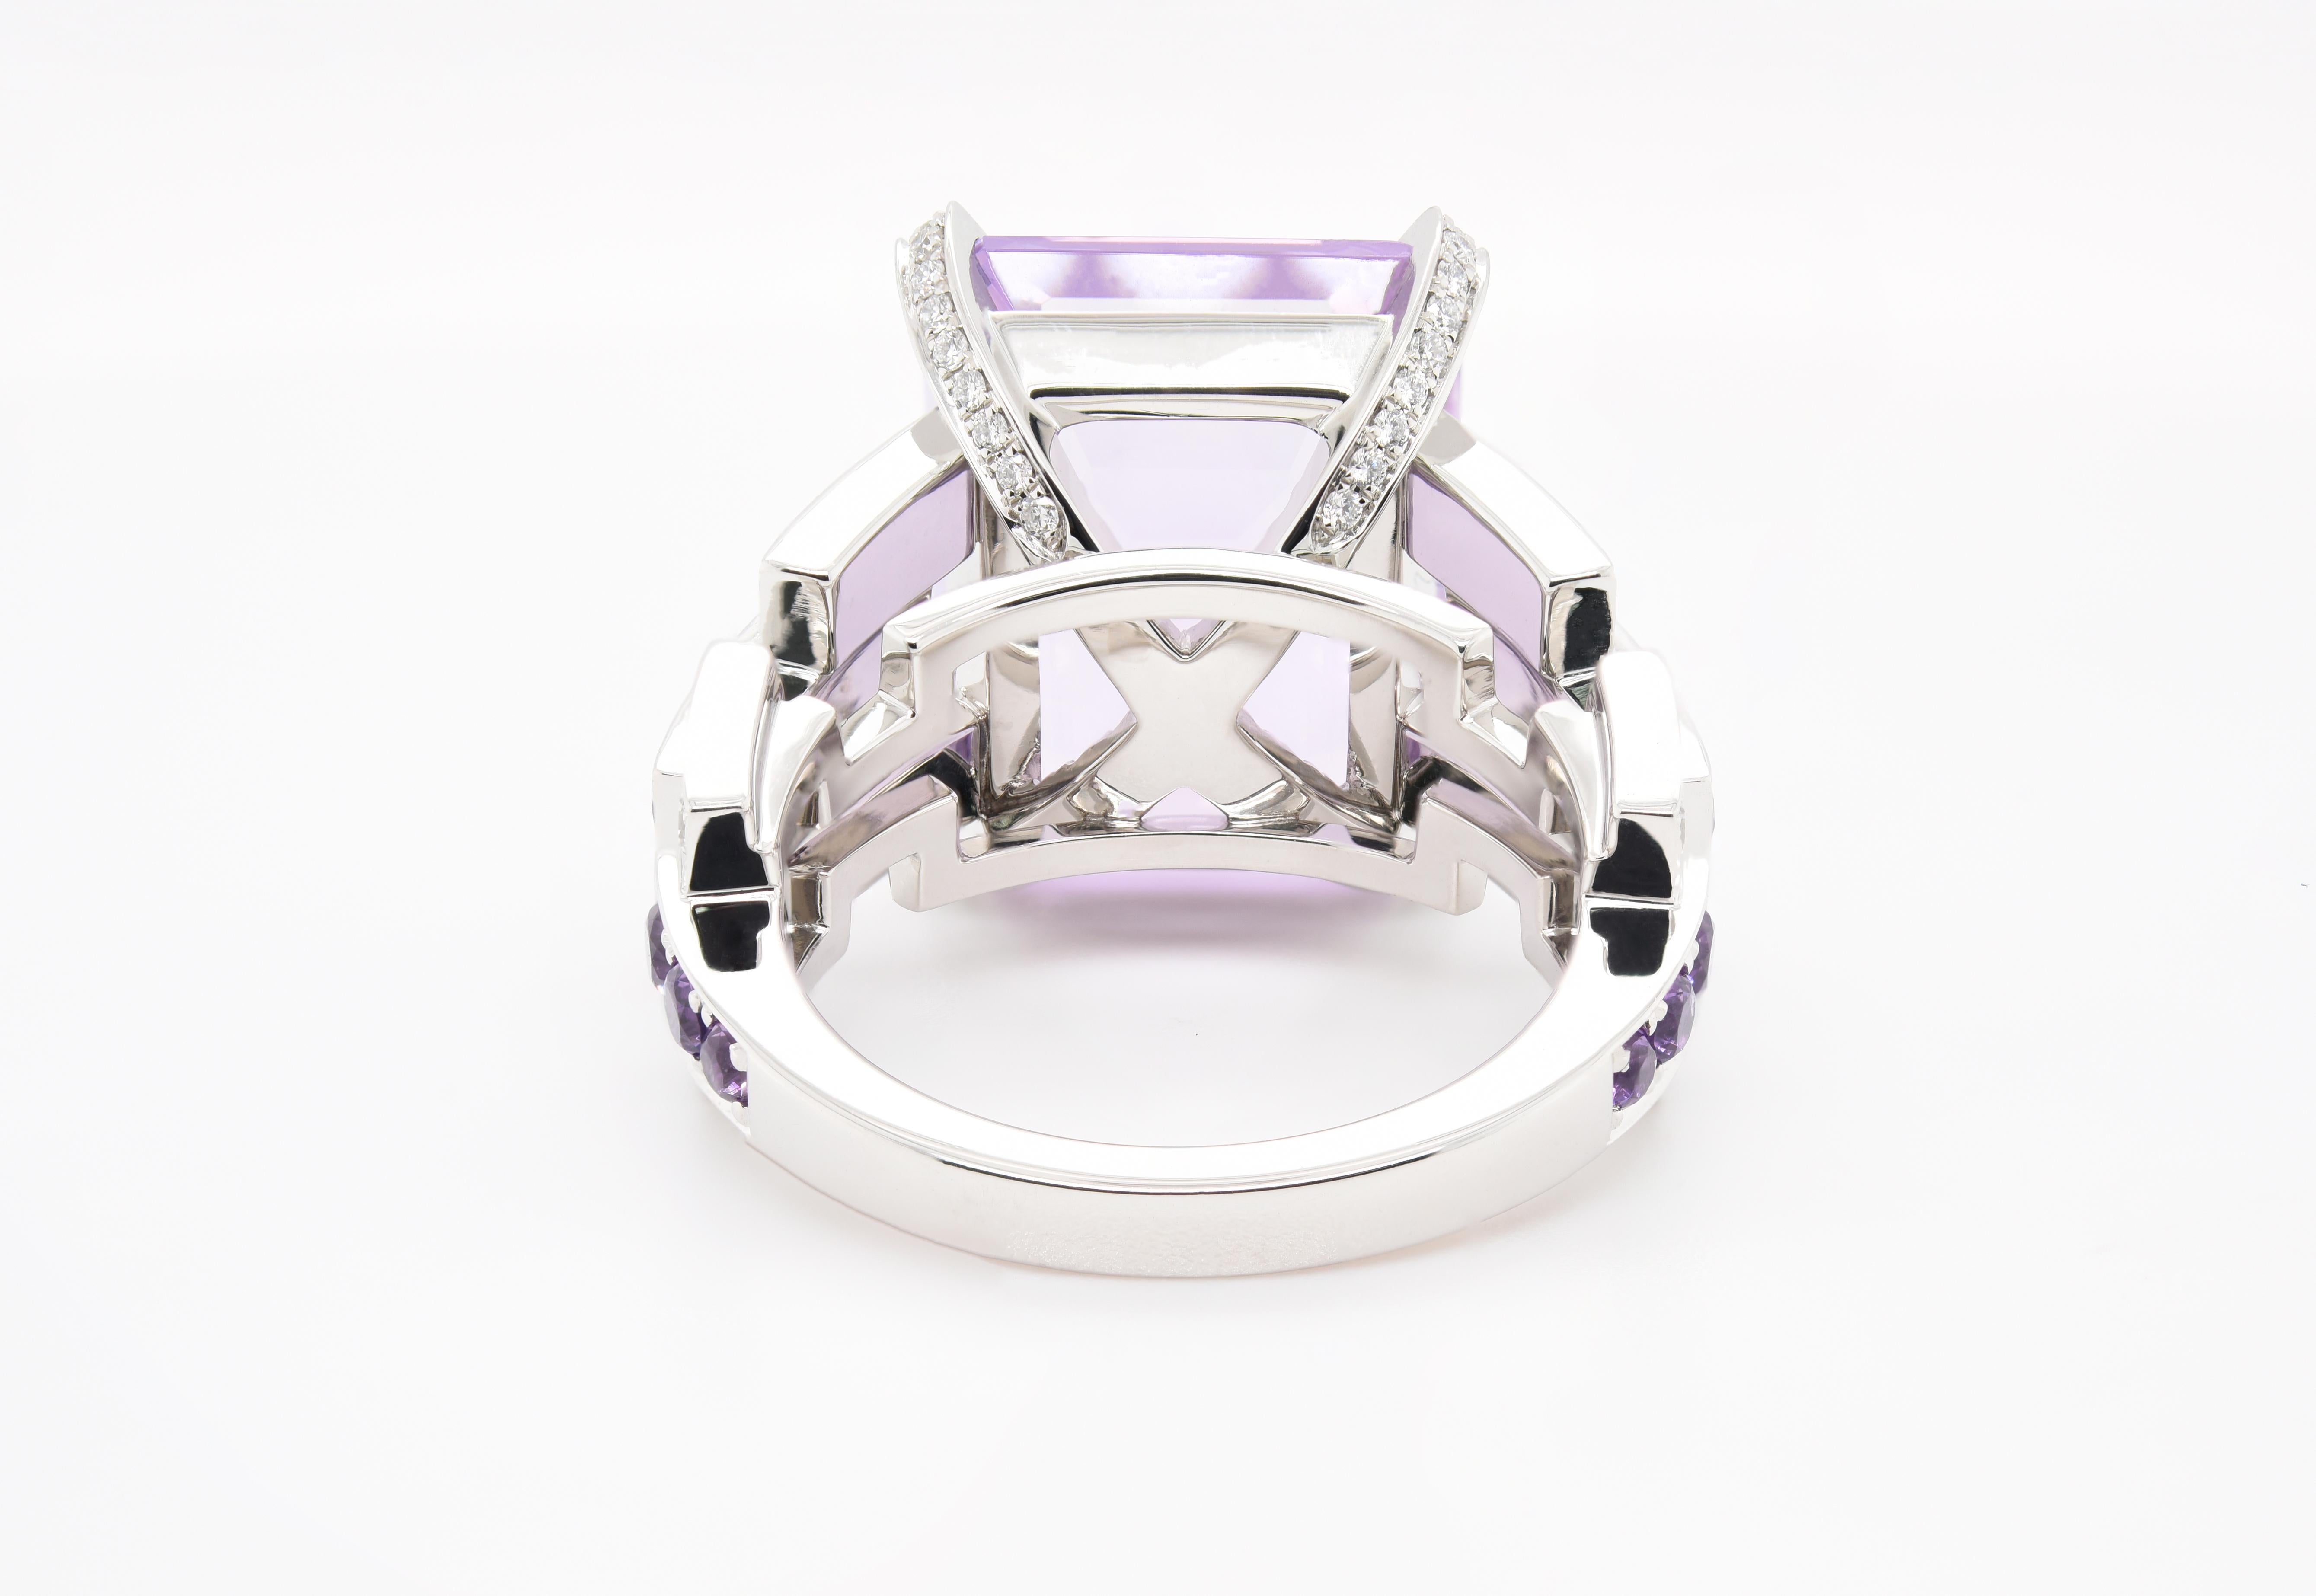 This amazing ring has over 11 carats in Amethyst and 60 Diamonds for a total gem weight of almost 12 carats all created in Platinum.
